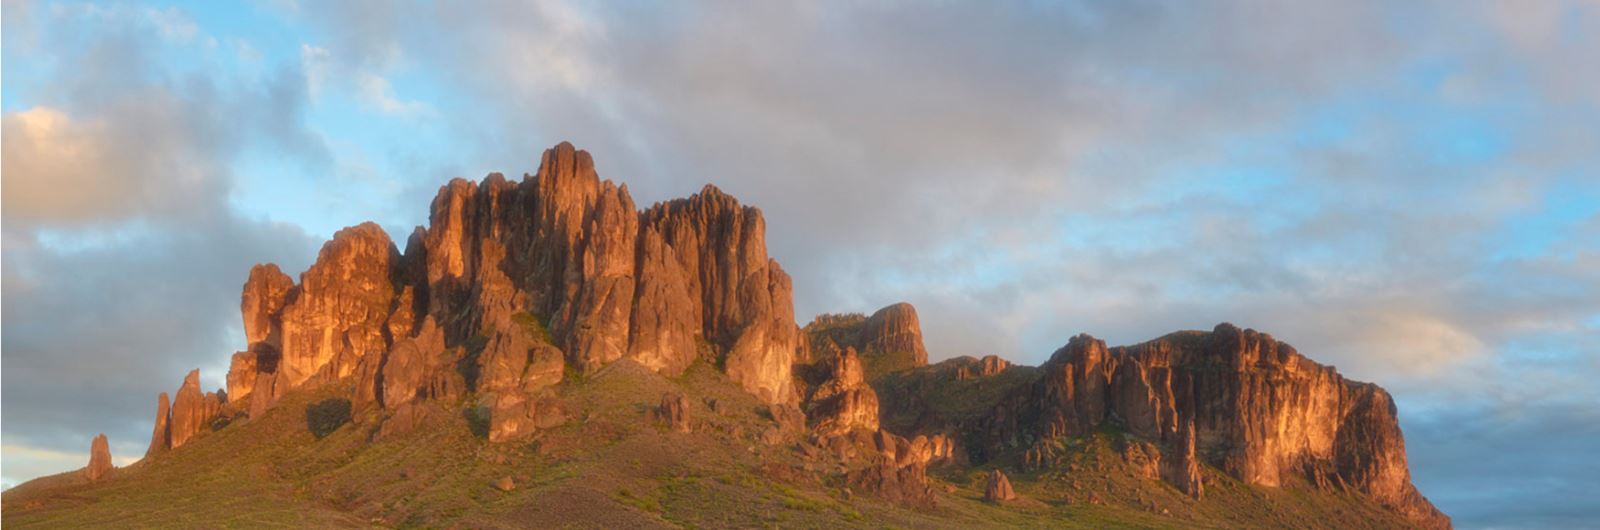 Superstition Mountains in Blossom Rock Mesa, Arizona